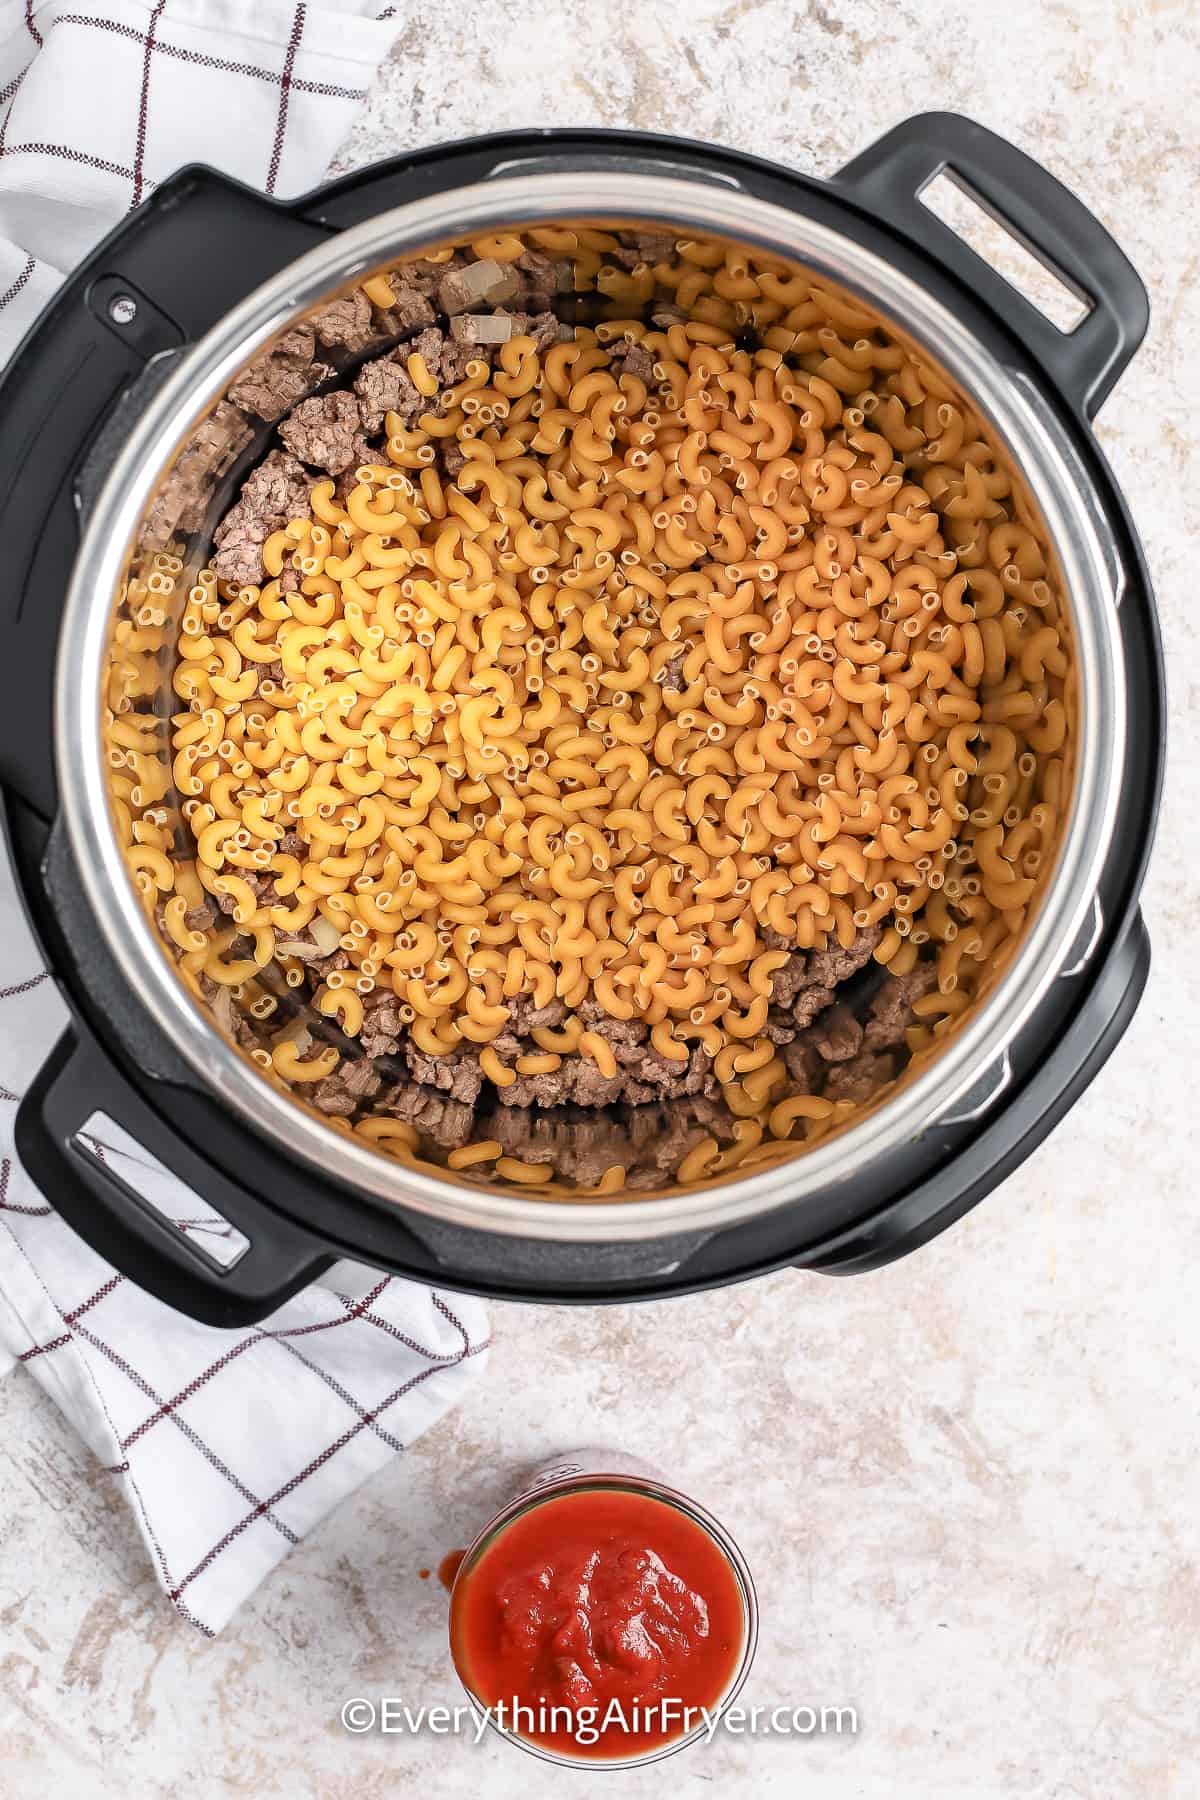 Macaroni noodles and ground beef in the instant pot